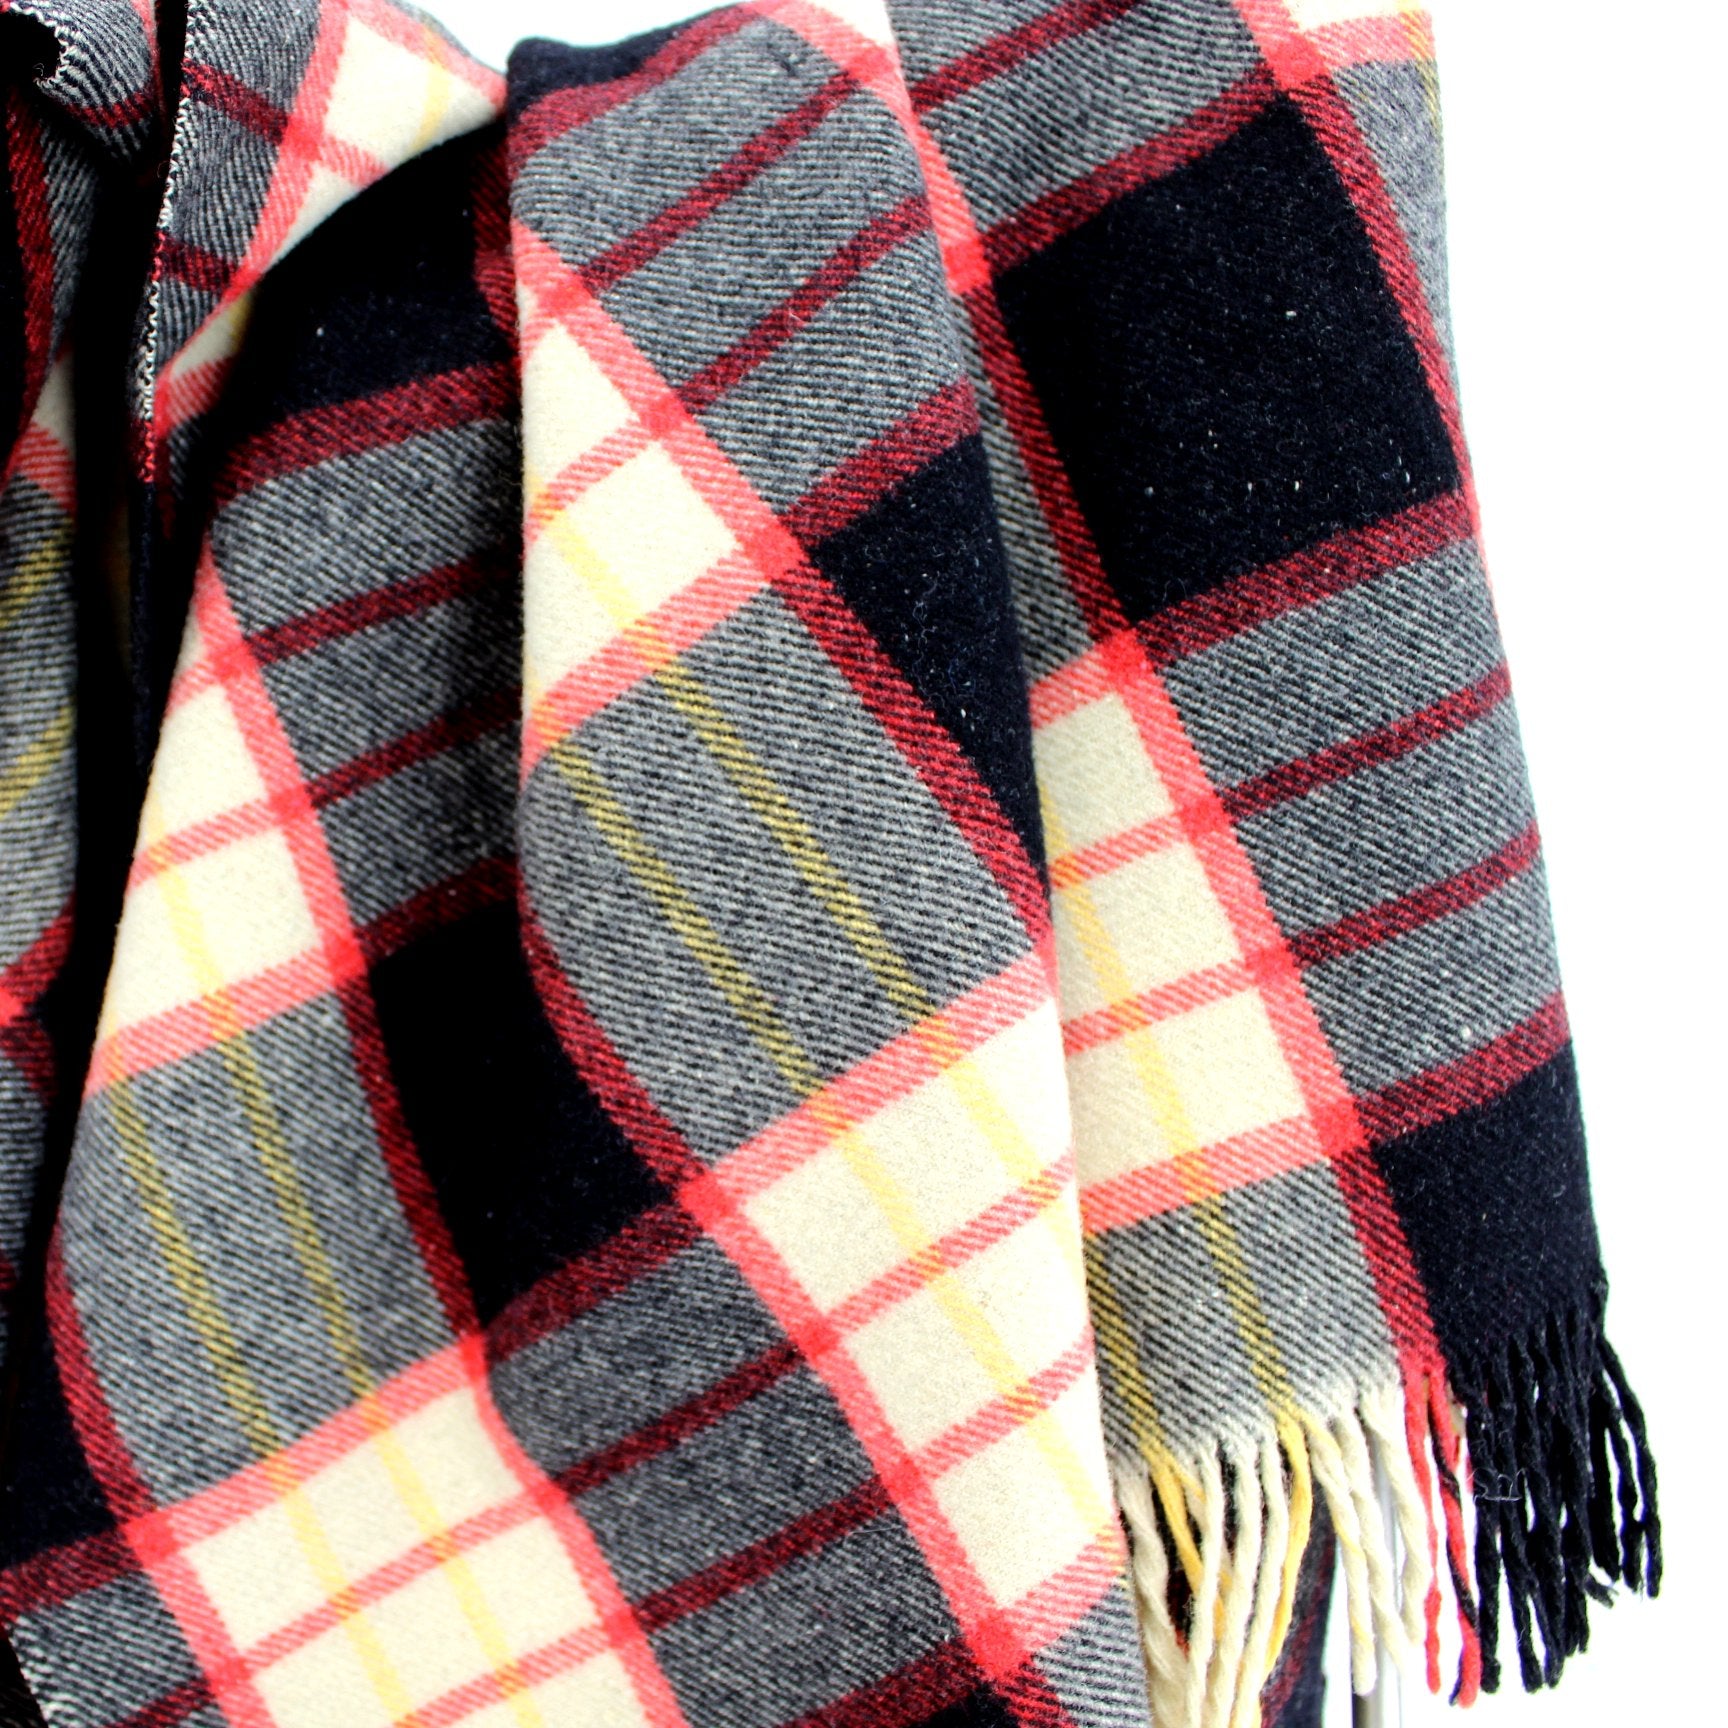 "Mister" Fringed Estate Throw Blanket Plaid Cream Red Back Yellow Fine Wool other closeup view of design